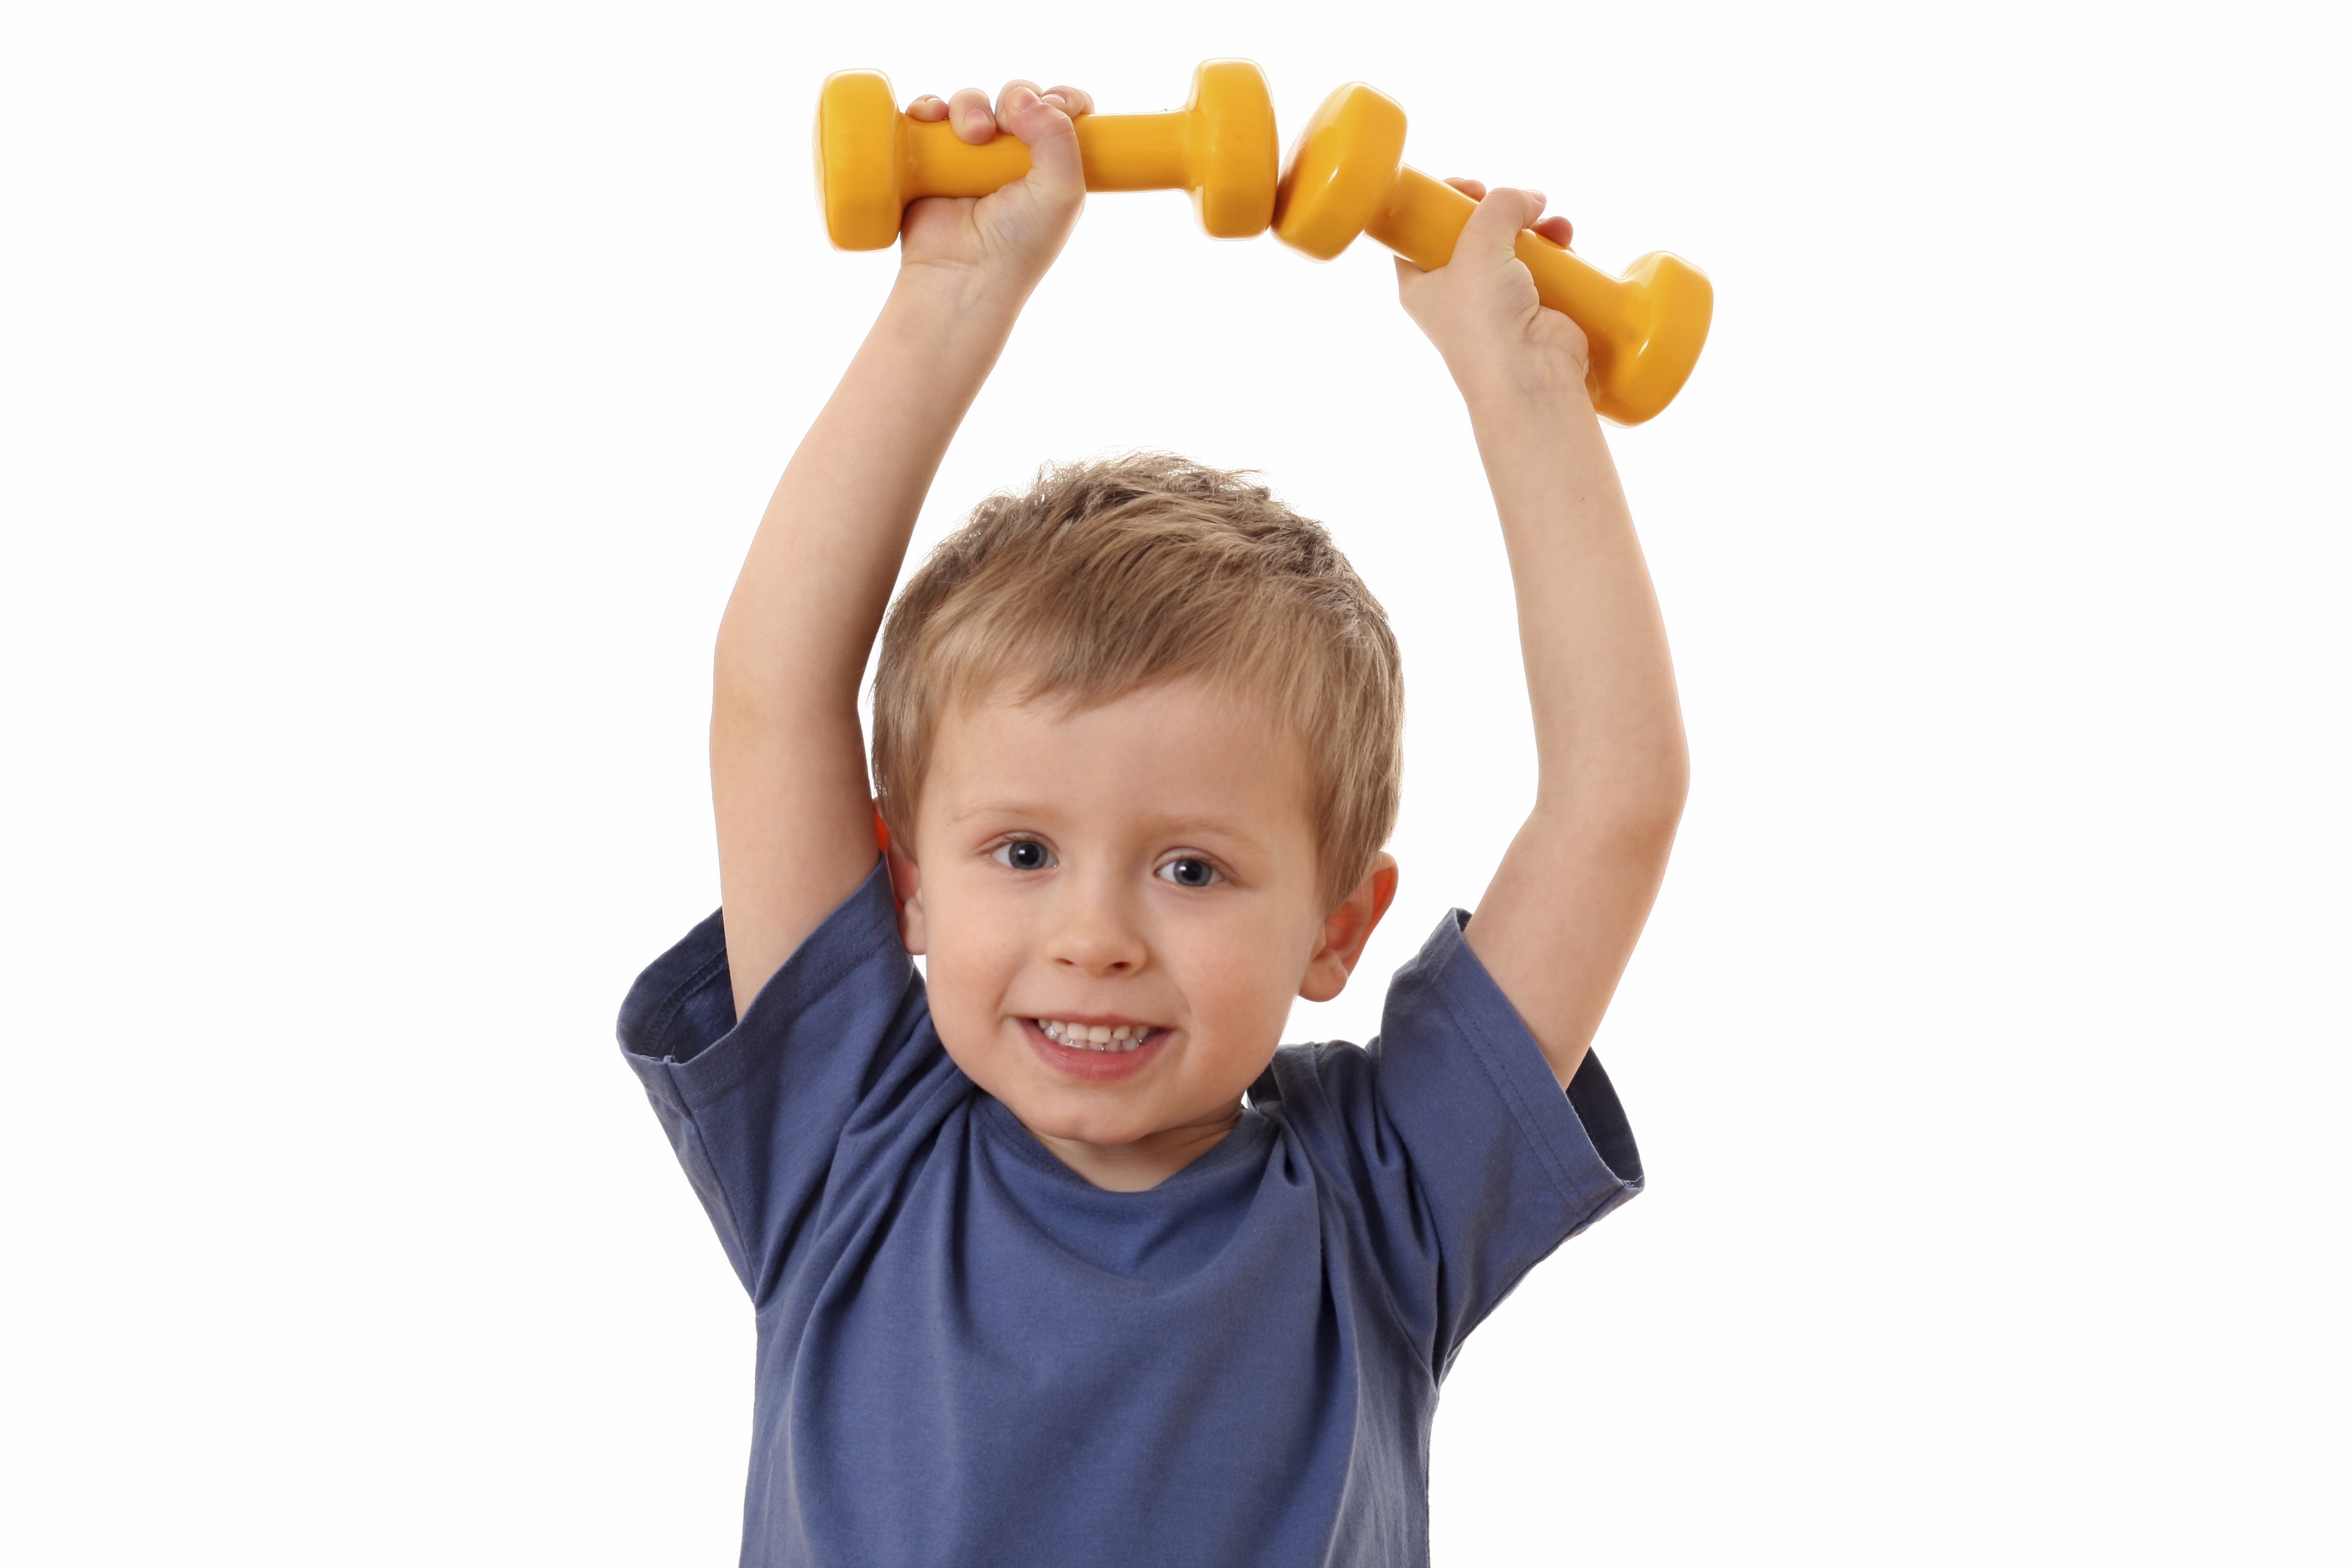 Is it safe for my child to strength train or lift weights? - ChildrensMD